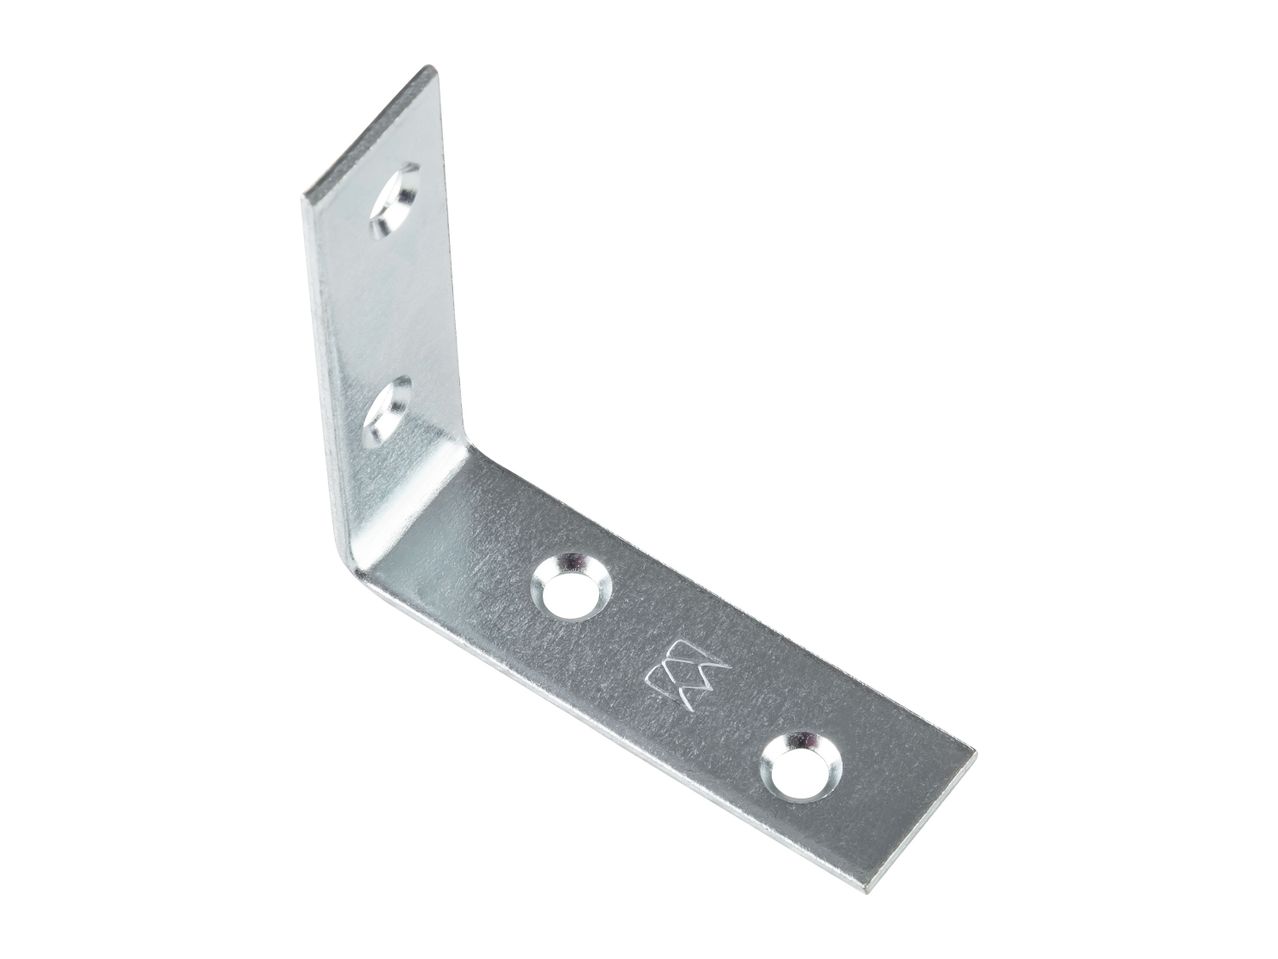 Go to full screen view: PARKSIDE Angle Brackets / Mending Plates / T-Brackets / Corner Braces - Image 10